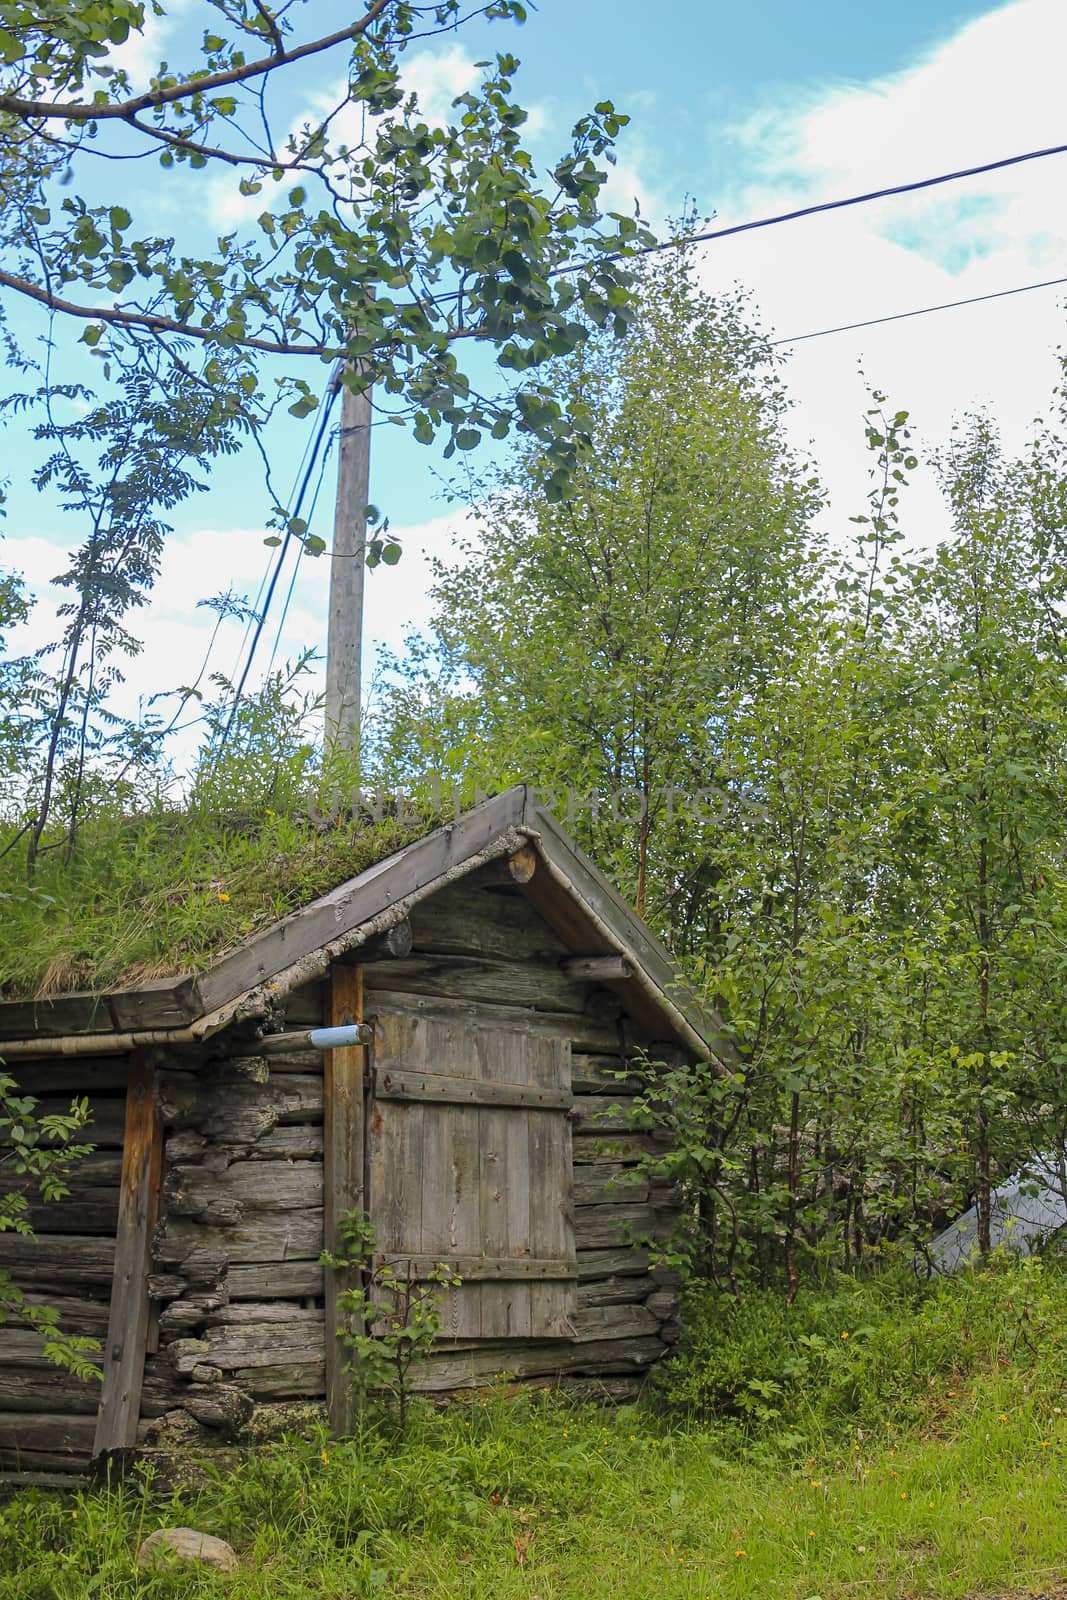 Old wooden cabin hut with overgrown roof, Hemsedal, Norway. by Arkadij